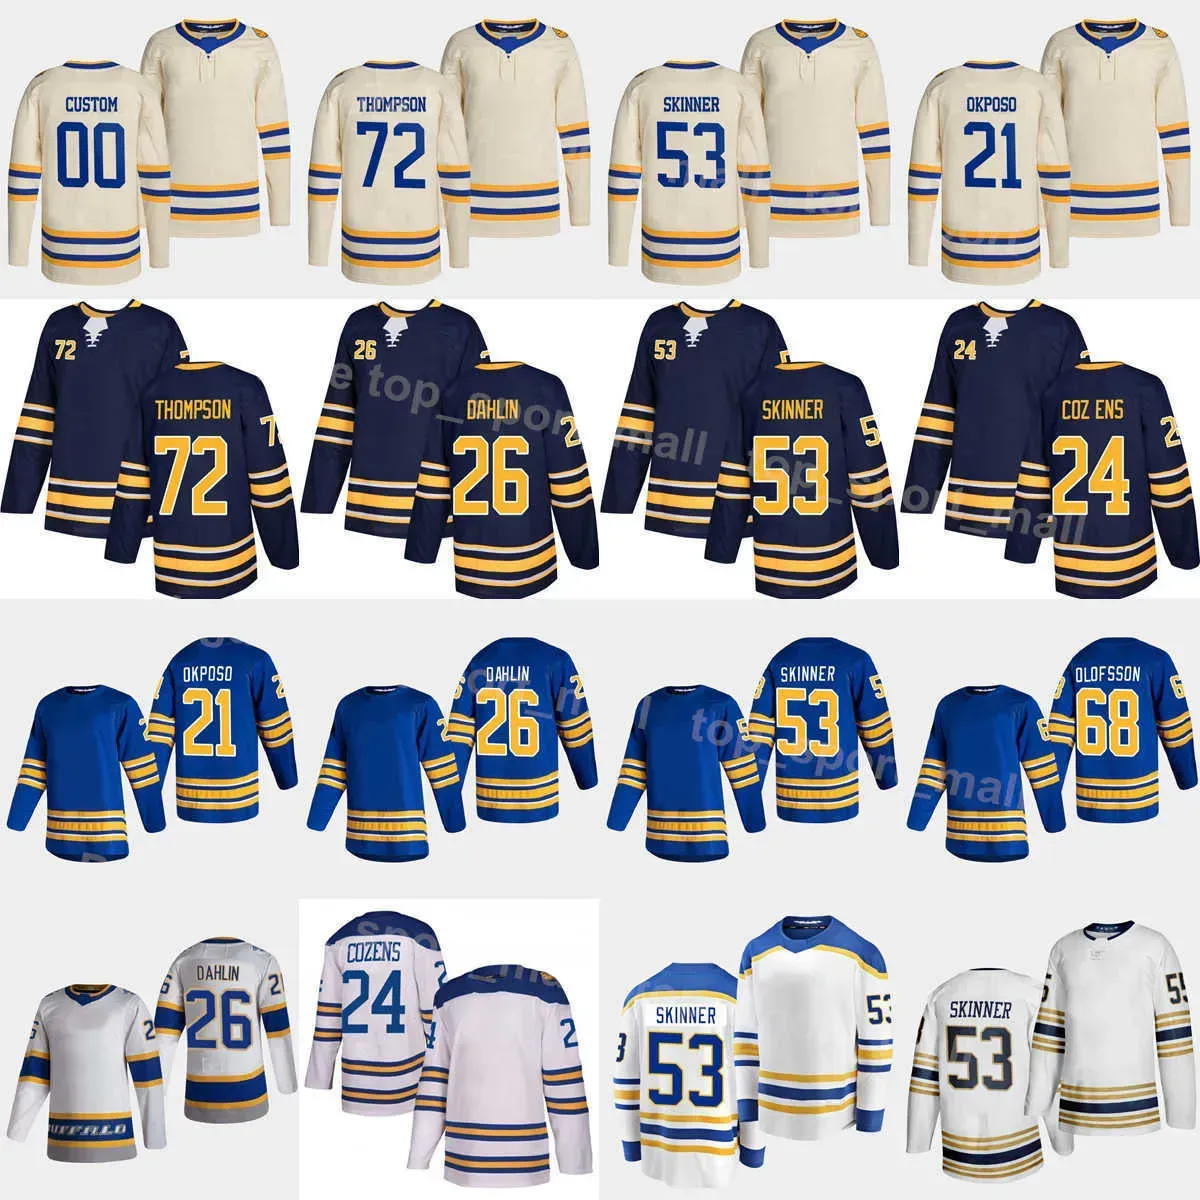 Maillots de hockey cousus 2023 Olofsson Tage Thompson Rasmus Dahlin Jeff Skinner Kyle Okposo Dylan Cozens Victor Heritage Classic Hockey sur glace J